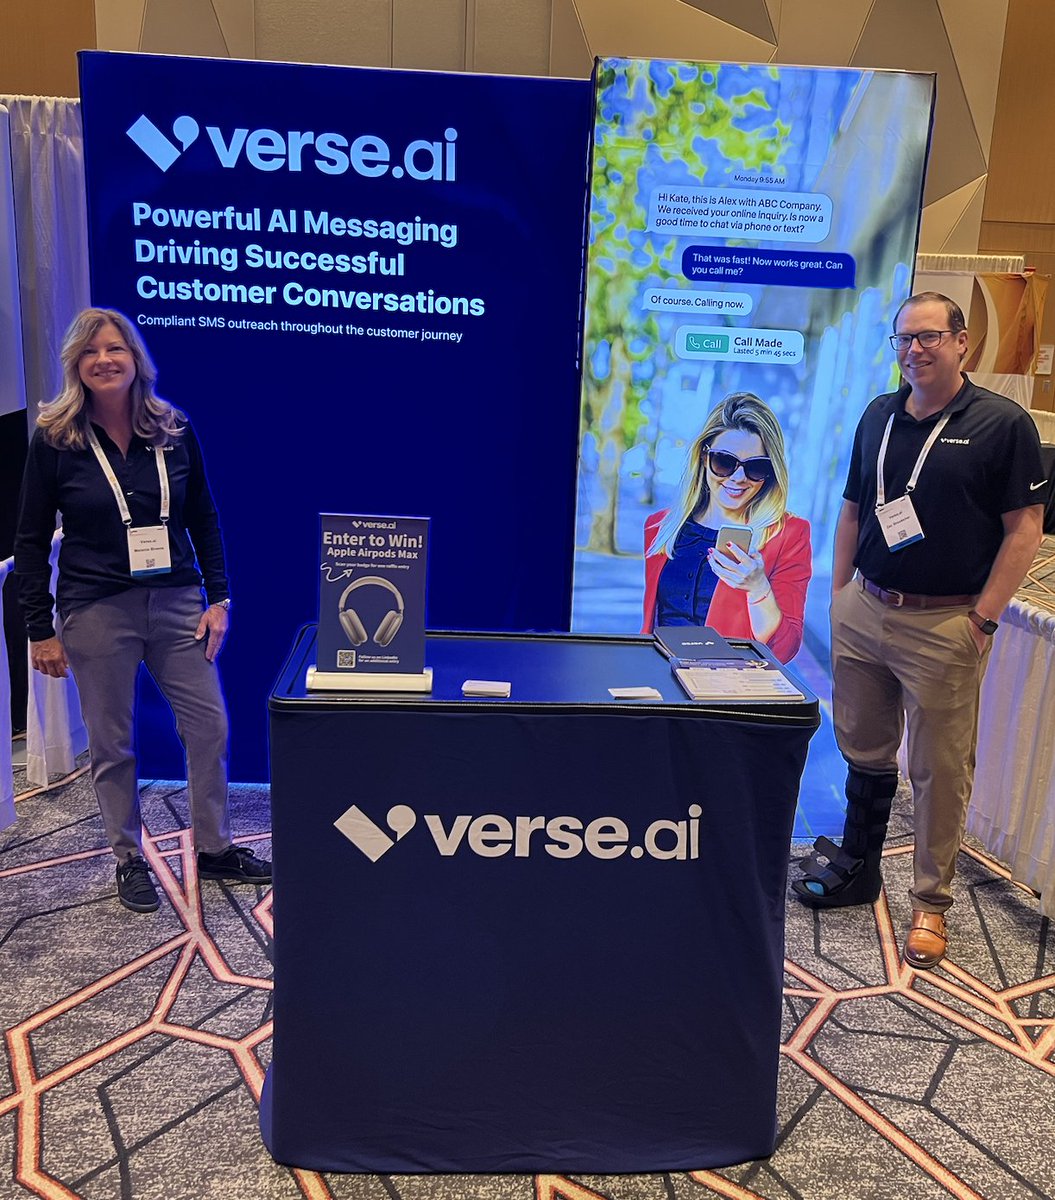 The team had an exciting first day at #FOIUSA and is ready for day 2! 🙌 Looking forward to another awesome day of helpful insights and great conversations. If you're at the event, make sure to stop by the booth and say hi. 👋
#tradeshows #conversationalai #sms